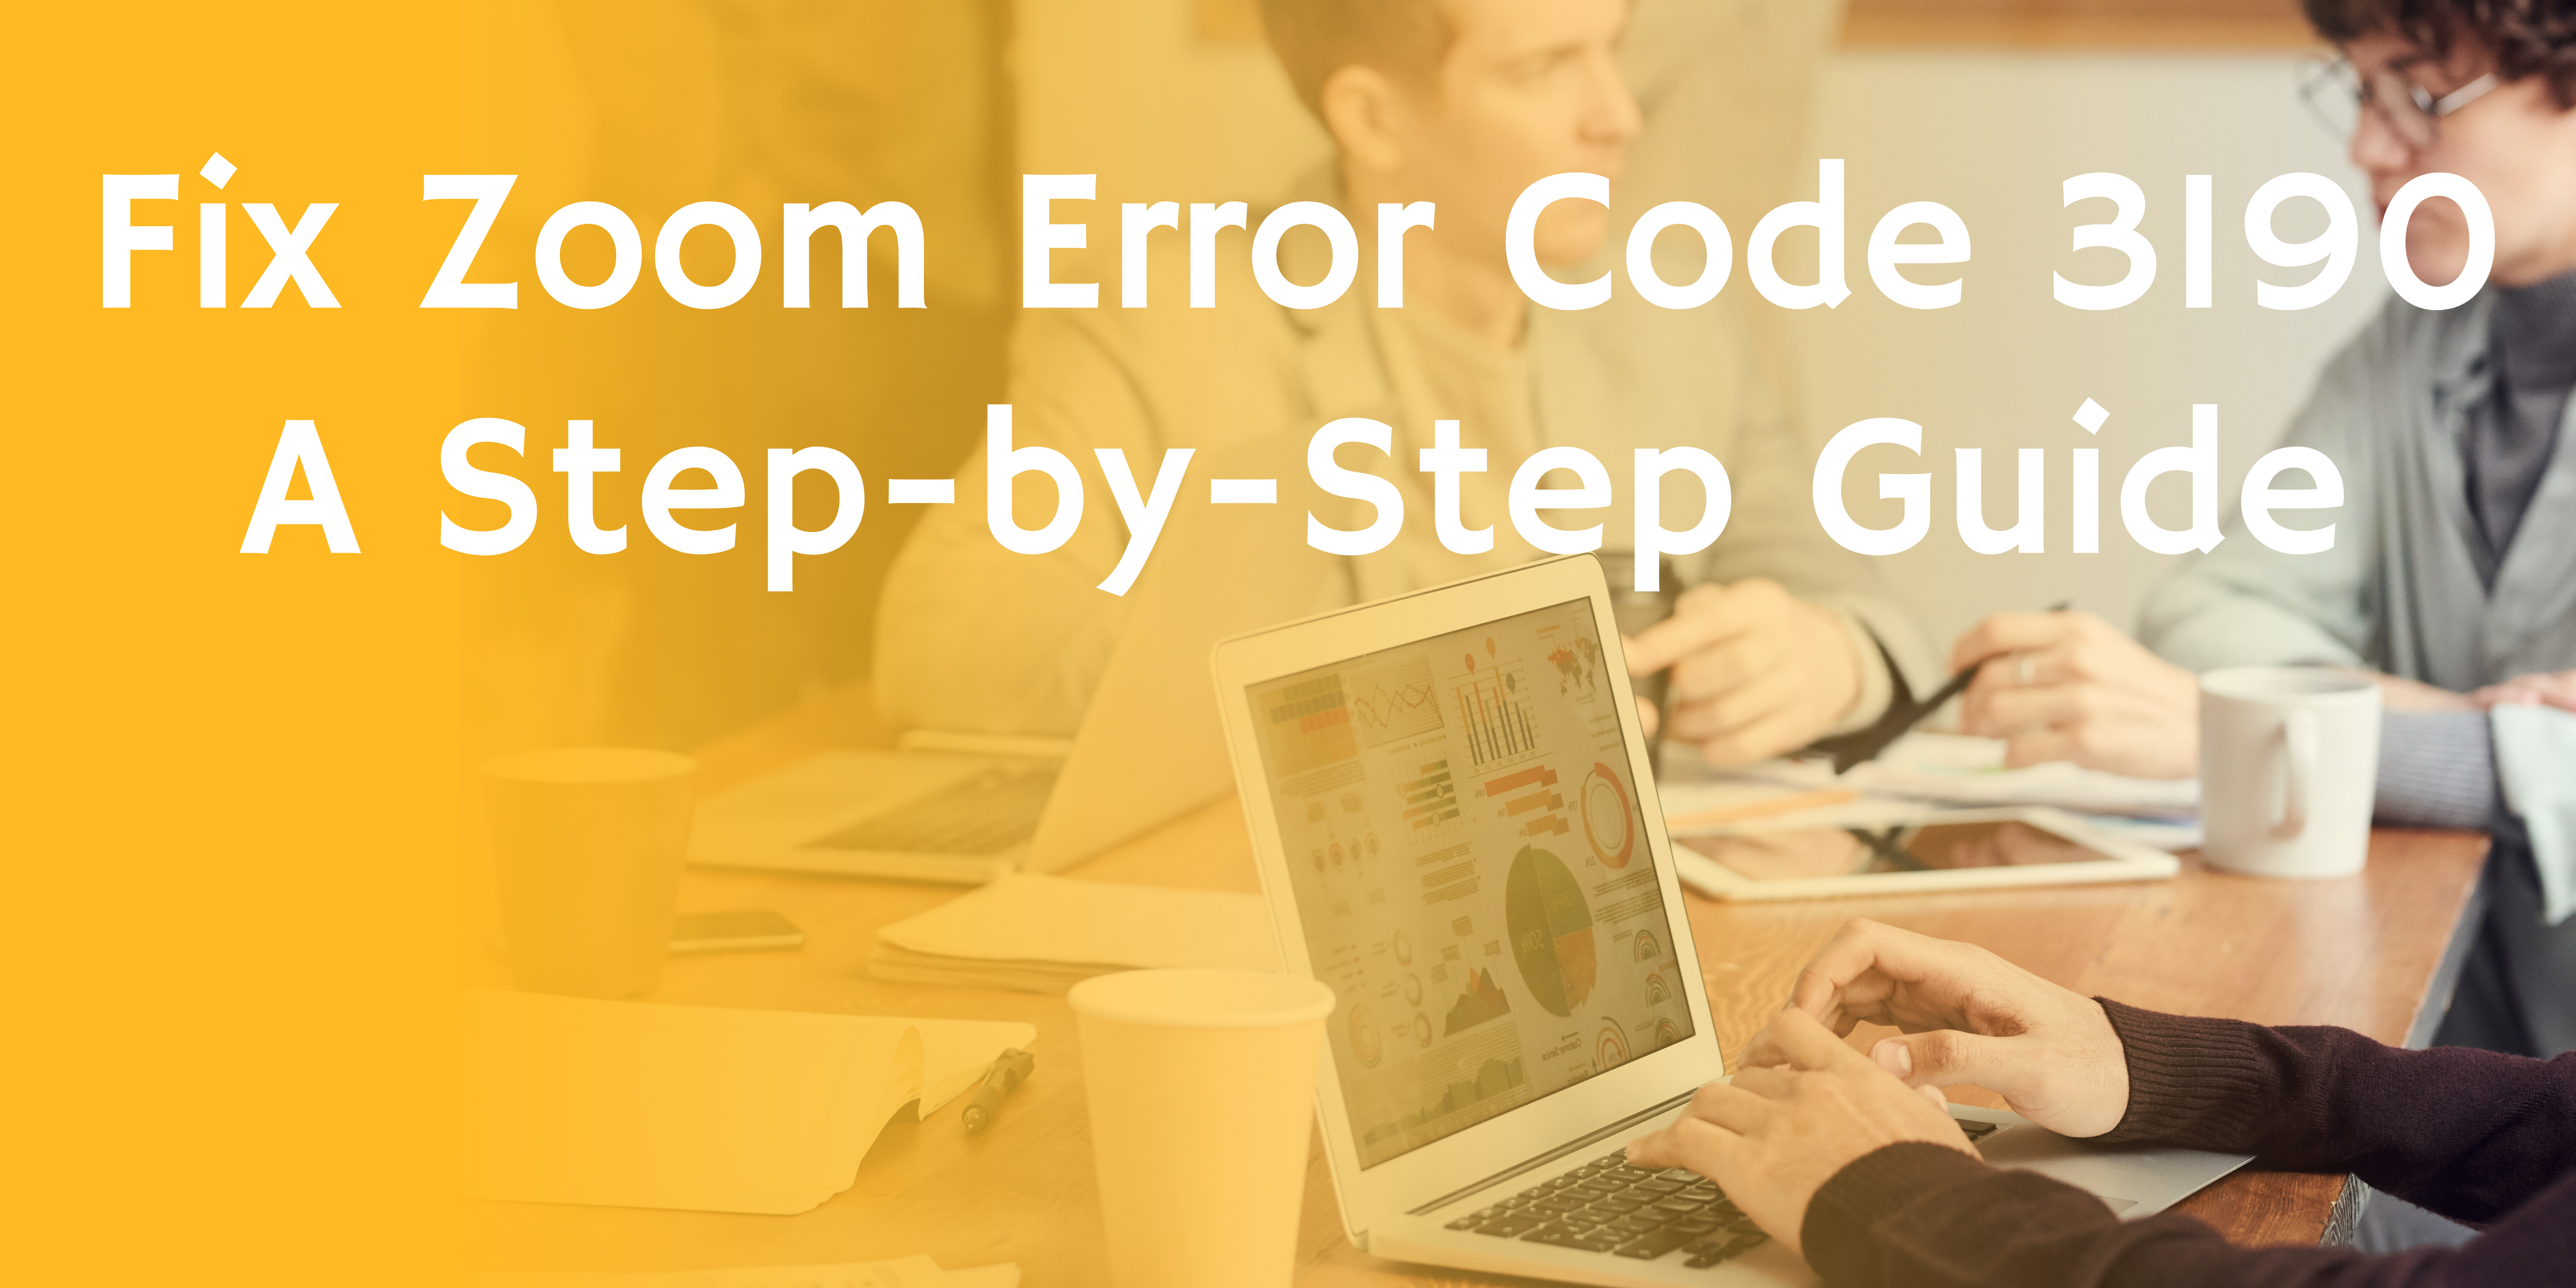 Fix Zoom Error Code 3190: A Step-by-Step Guide